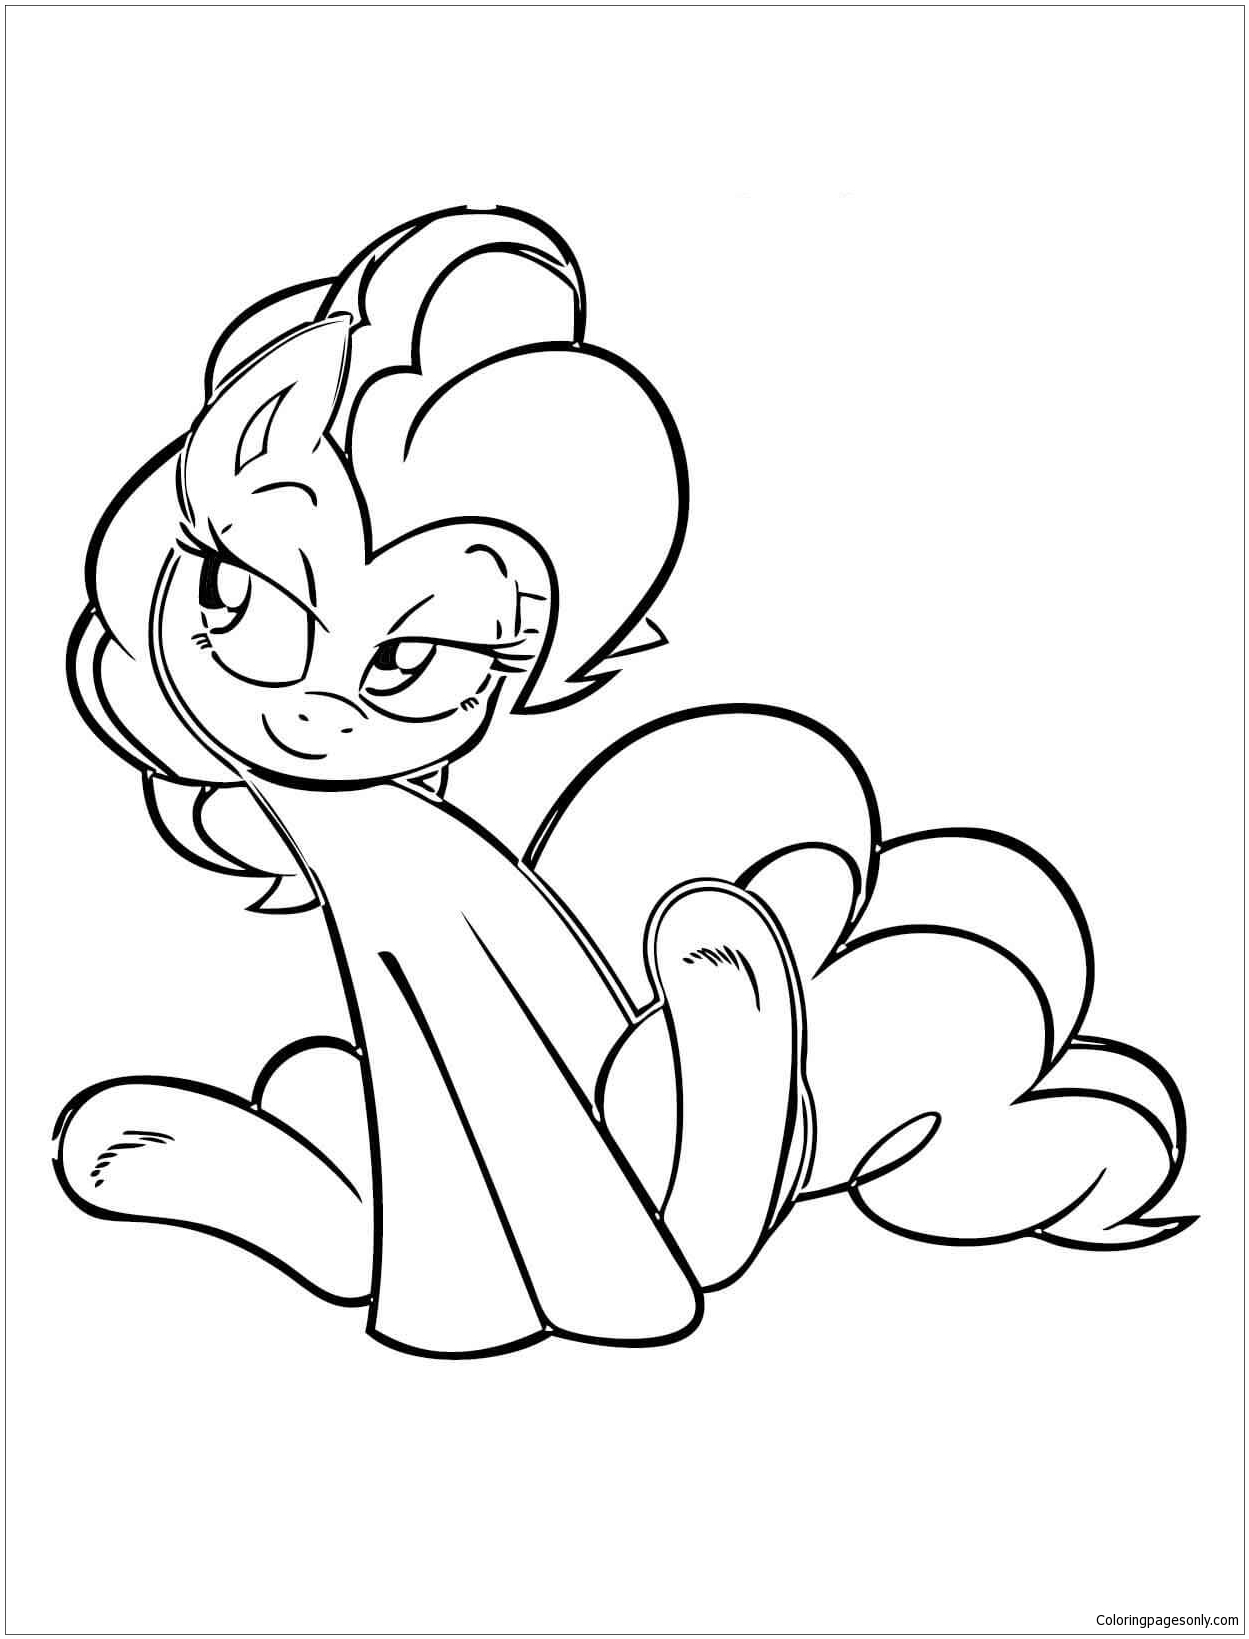 My Little Pony Pinkie Pie Sit Coloring Page - Free Coloring Pages Online